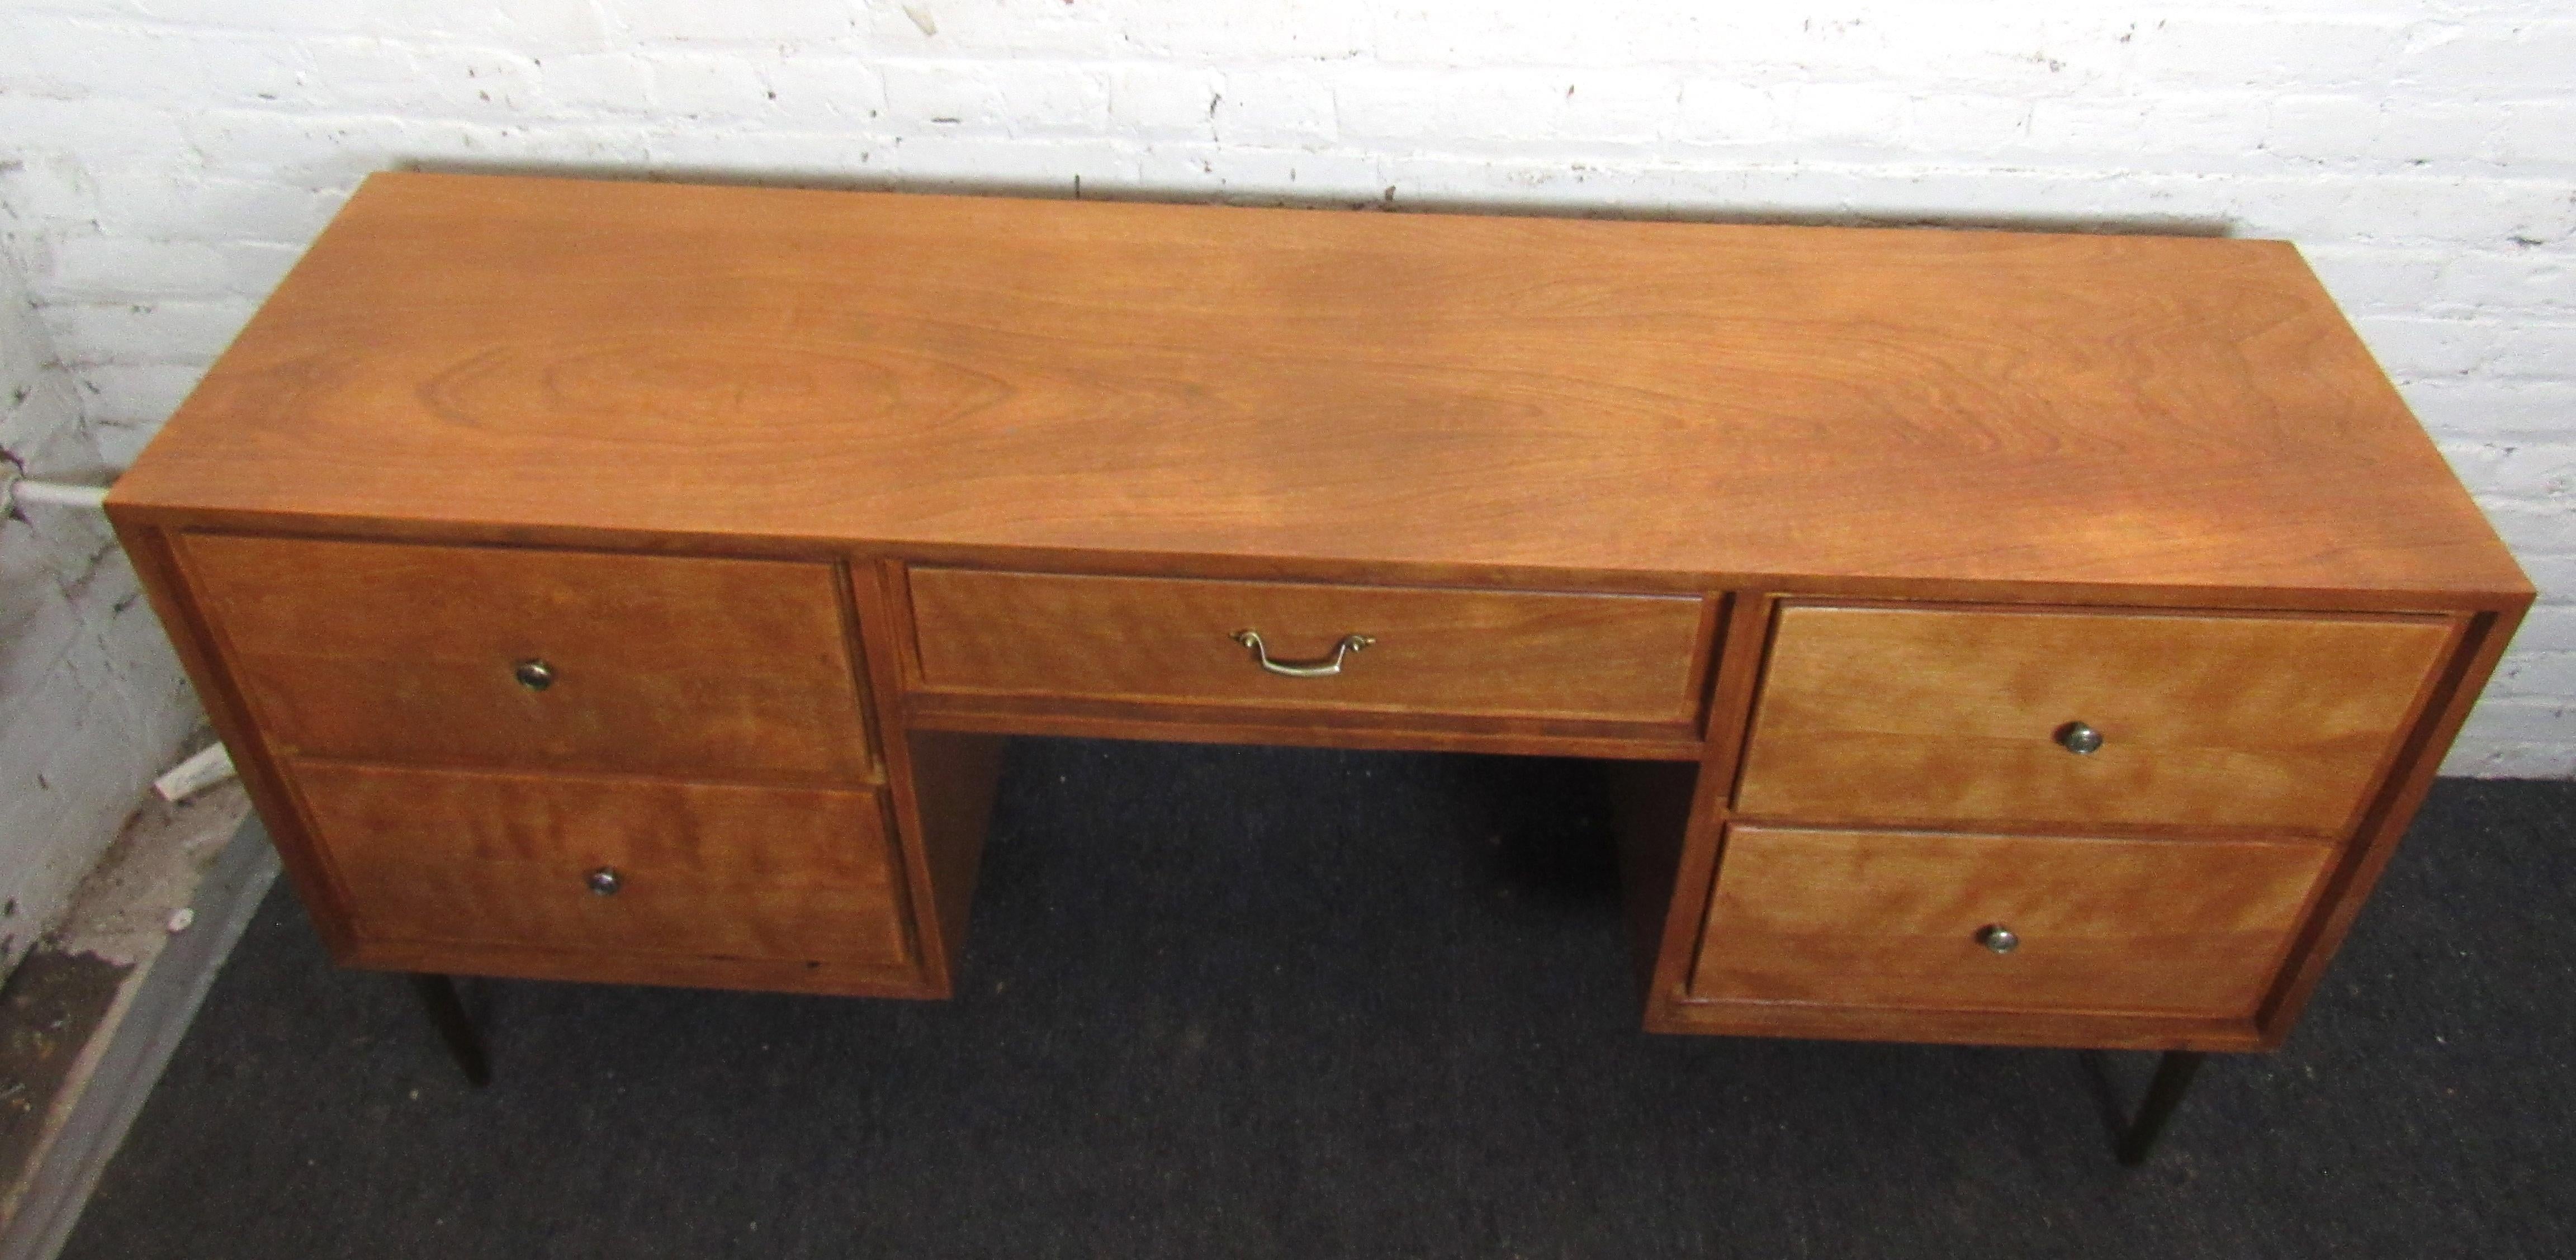 Mid-20th Century Mid-Century Modern Wood Desk with Brass Colored Legs